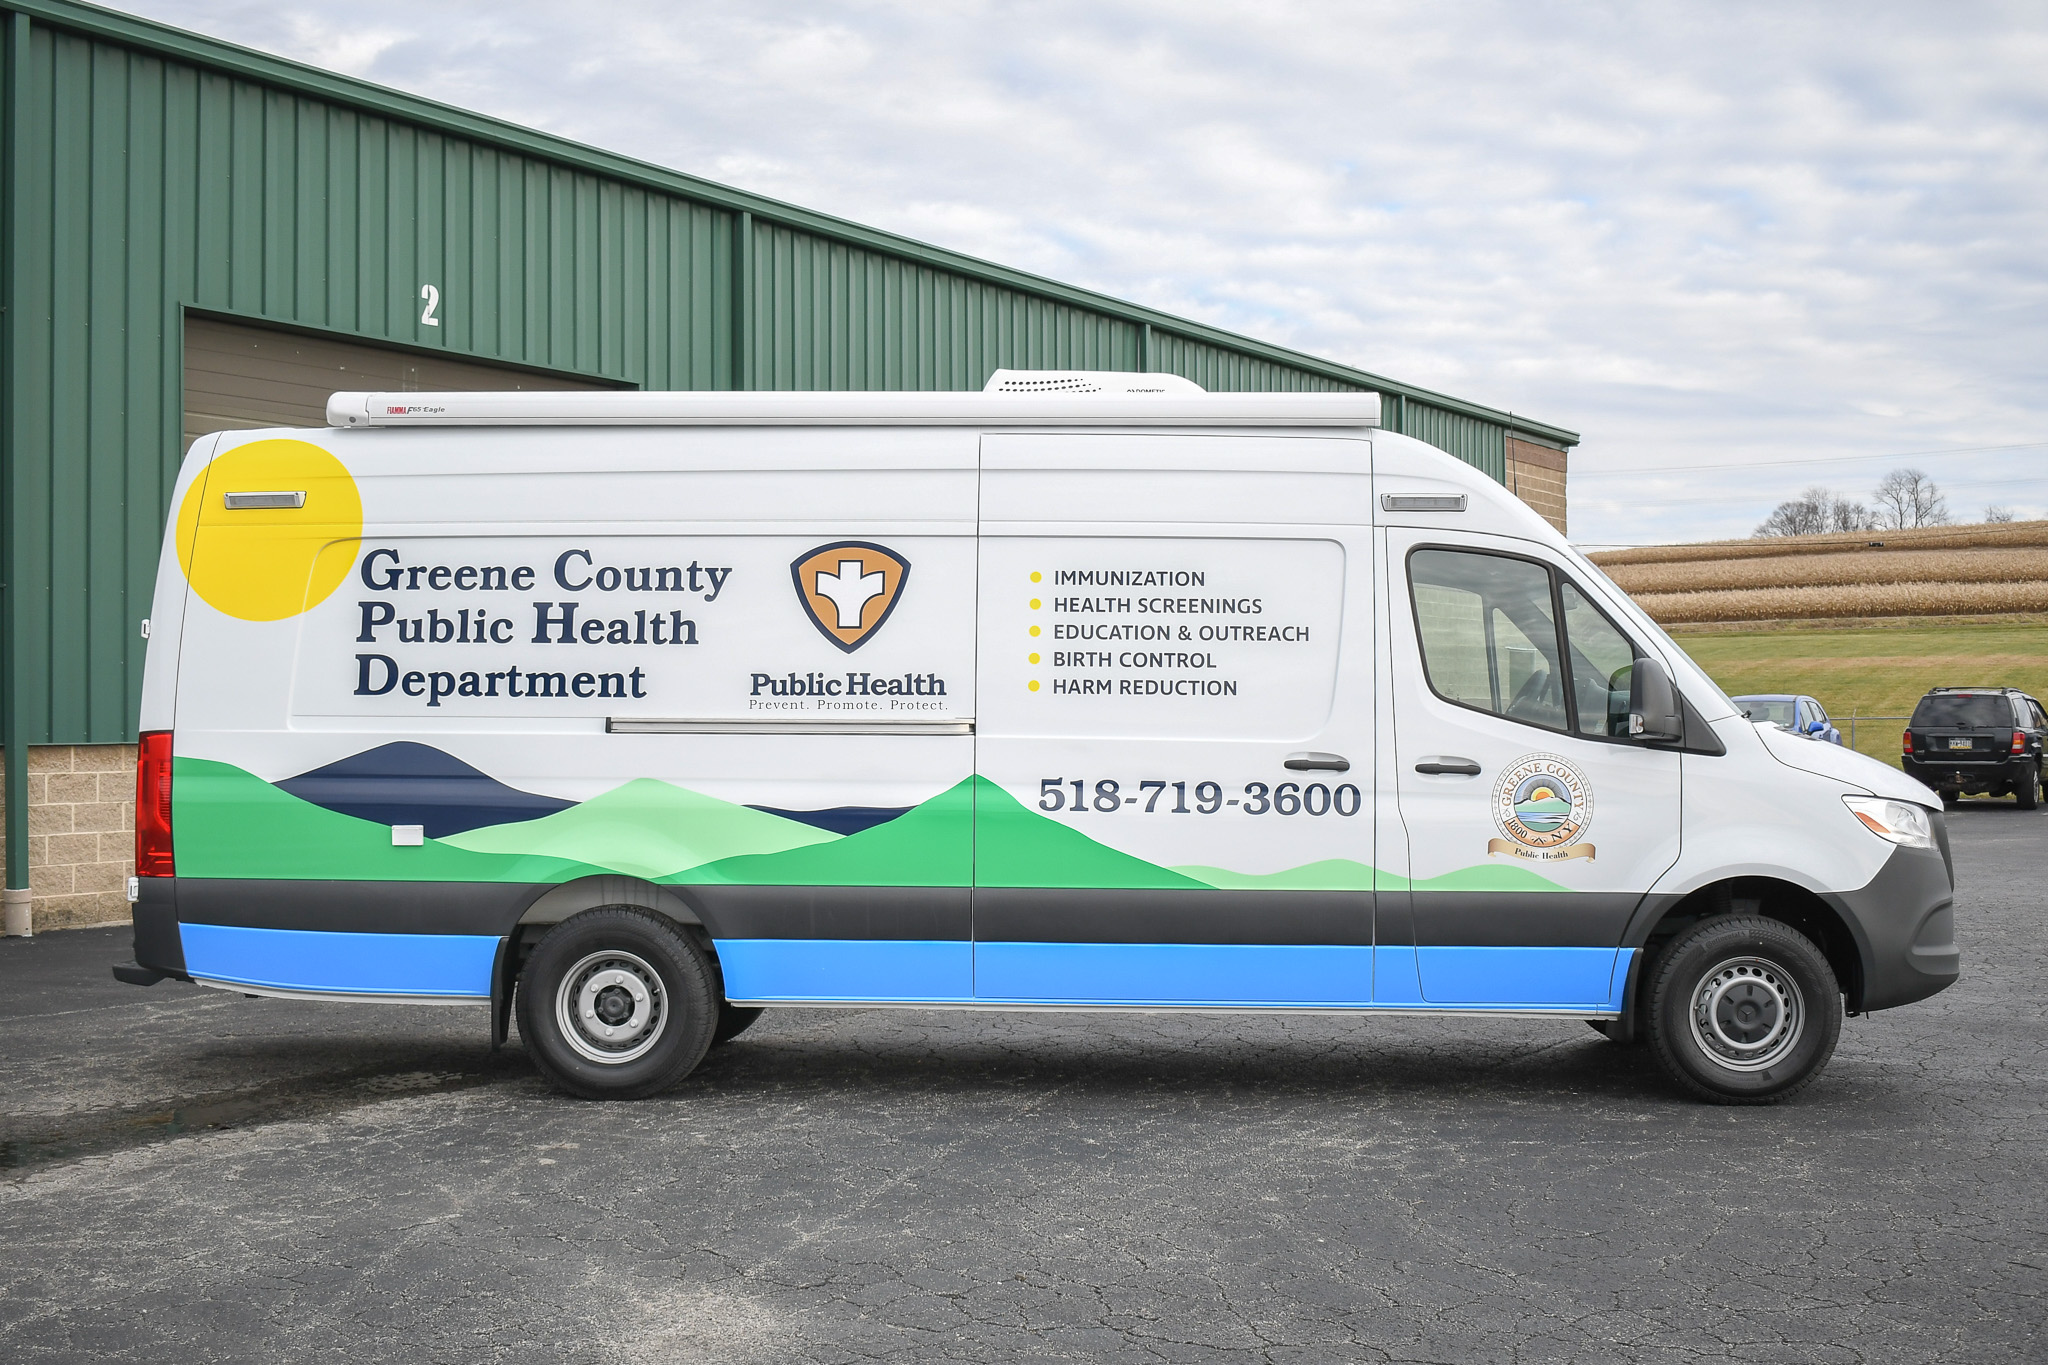 A side view of the unit for Greene County, NY.